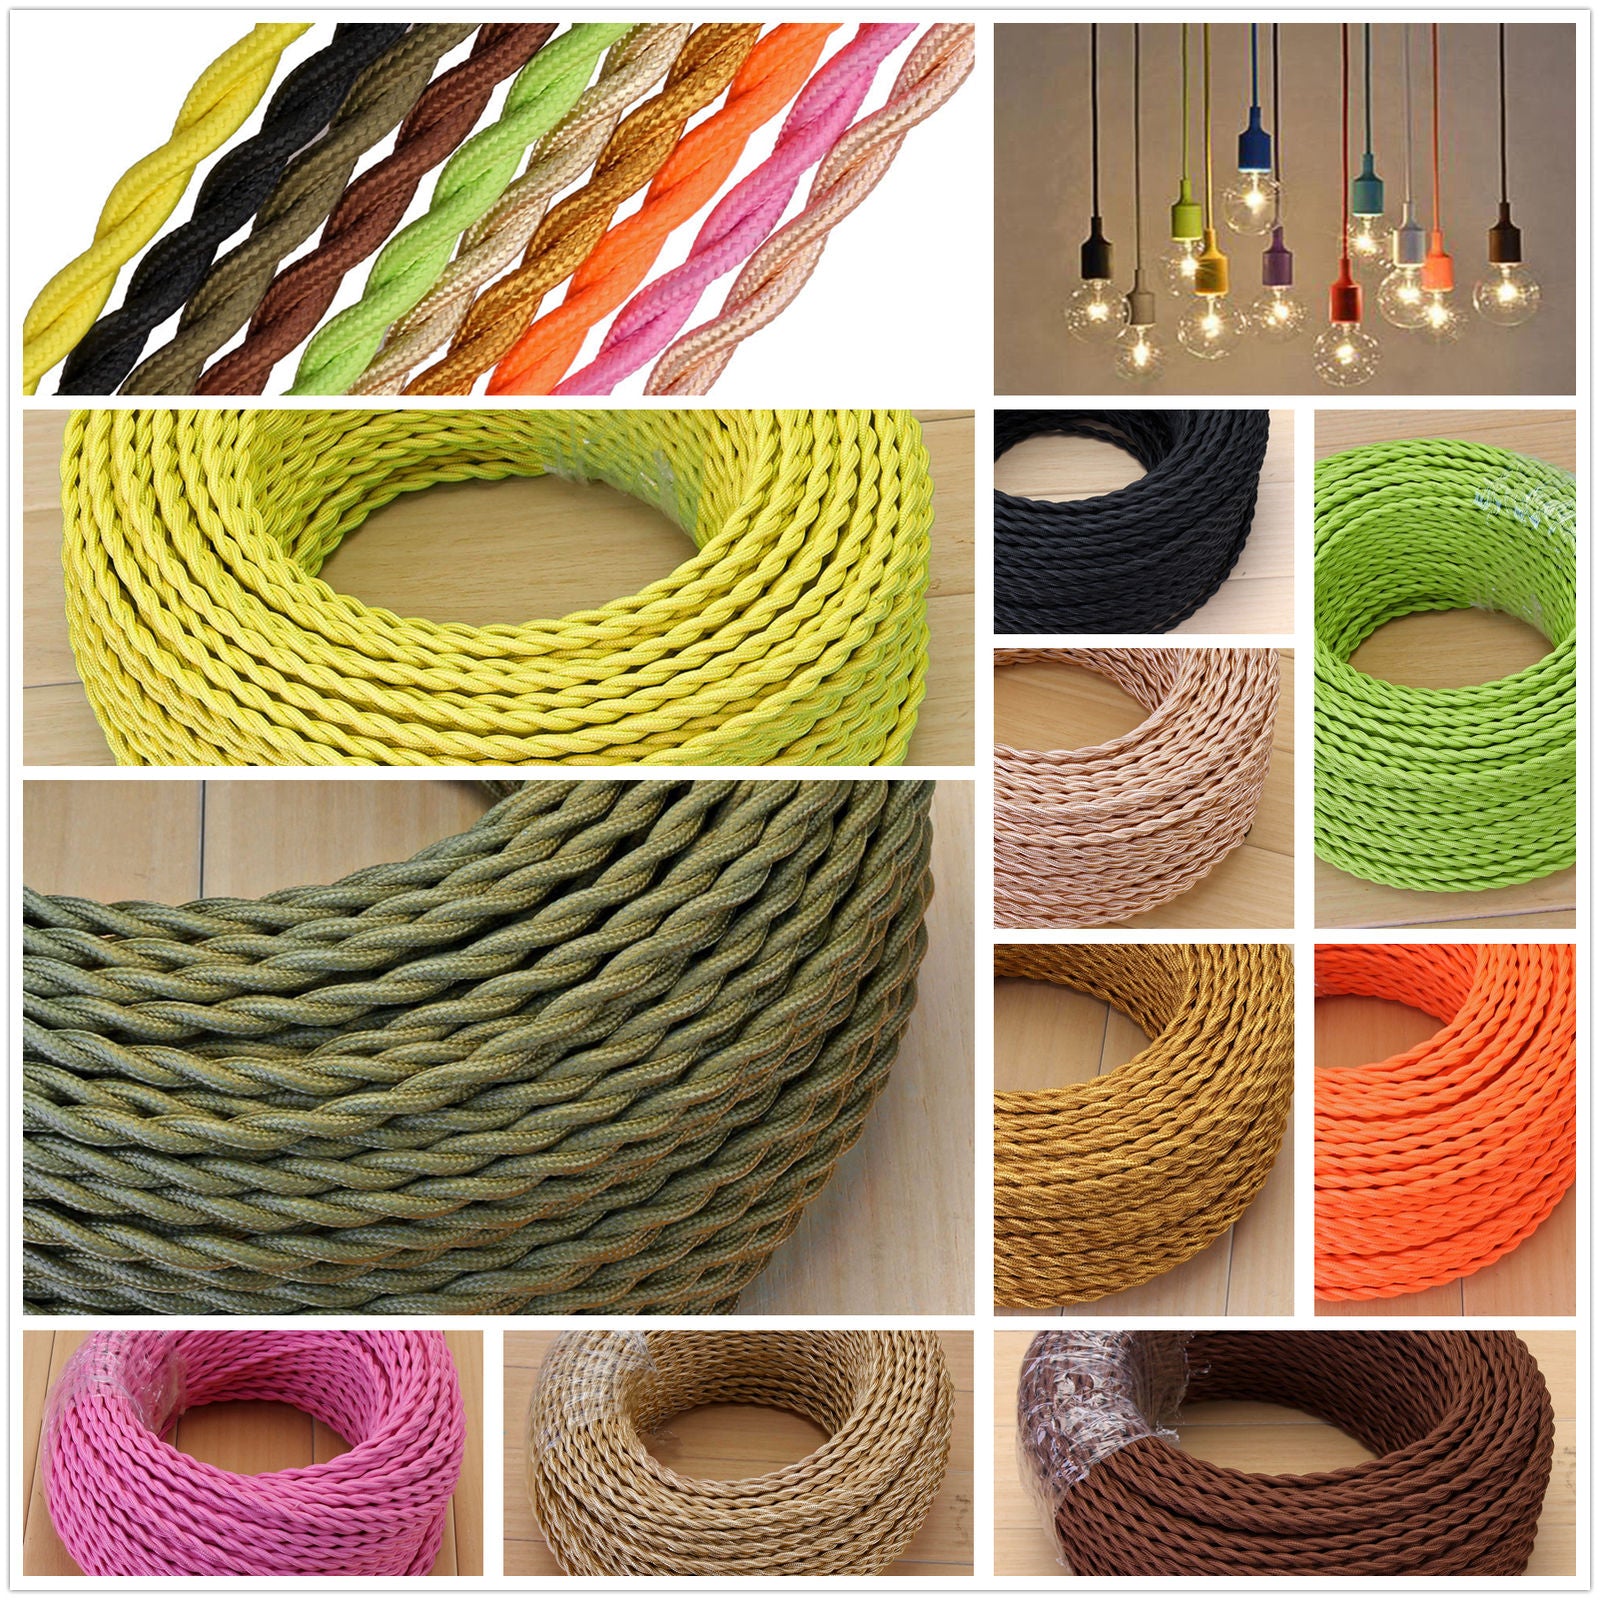 Hanging Light Decorative Cable.JPG